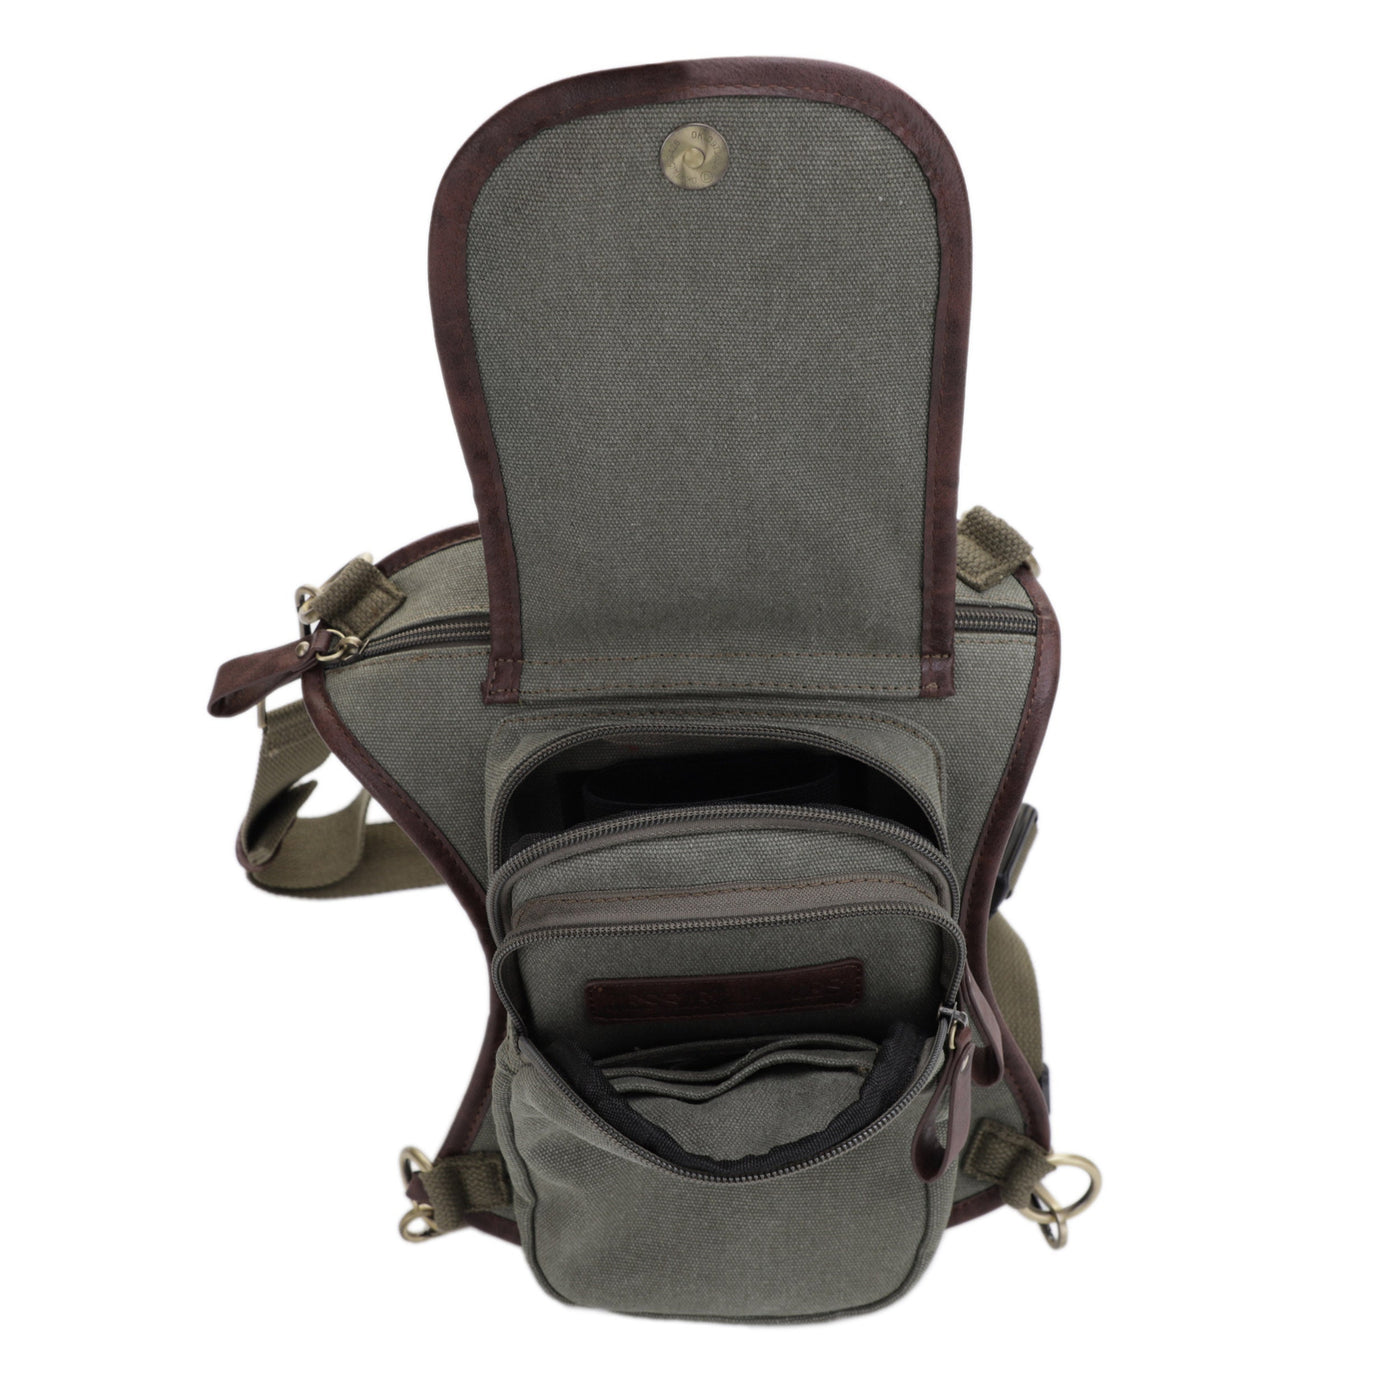 Cougar Canvas Concealed Carry Waist and Leg Bag